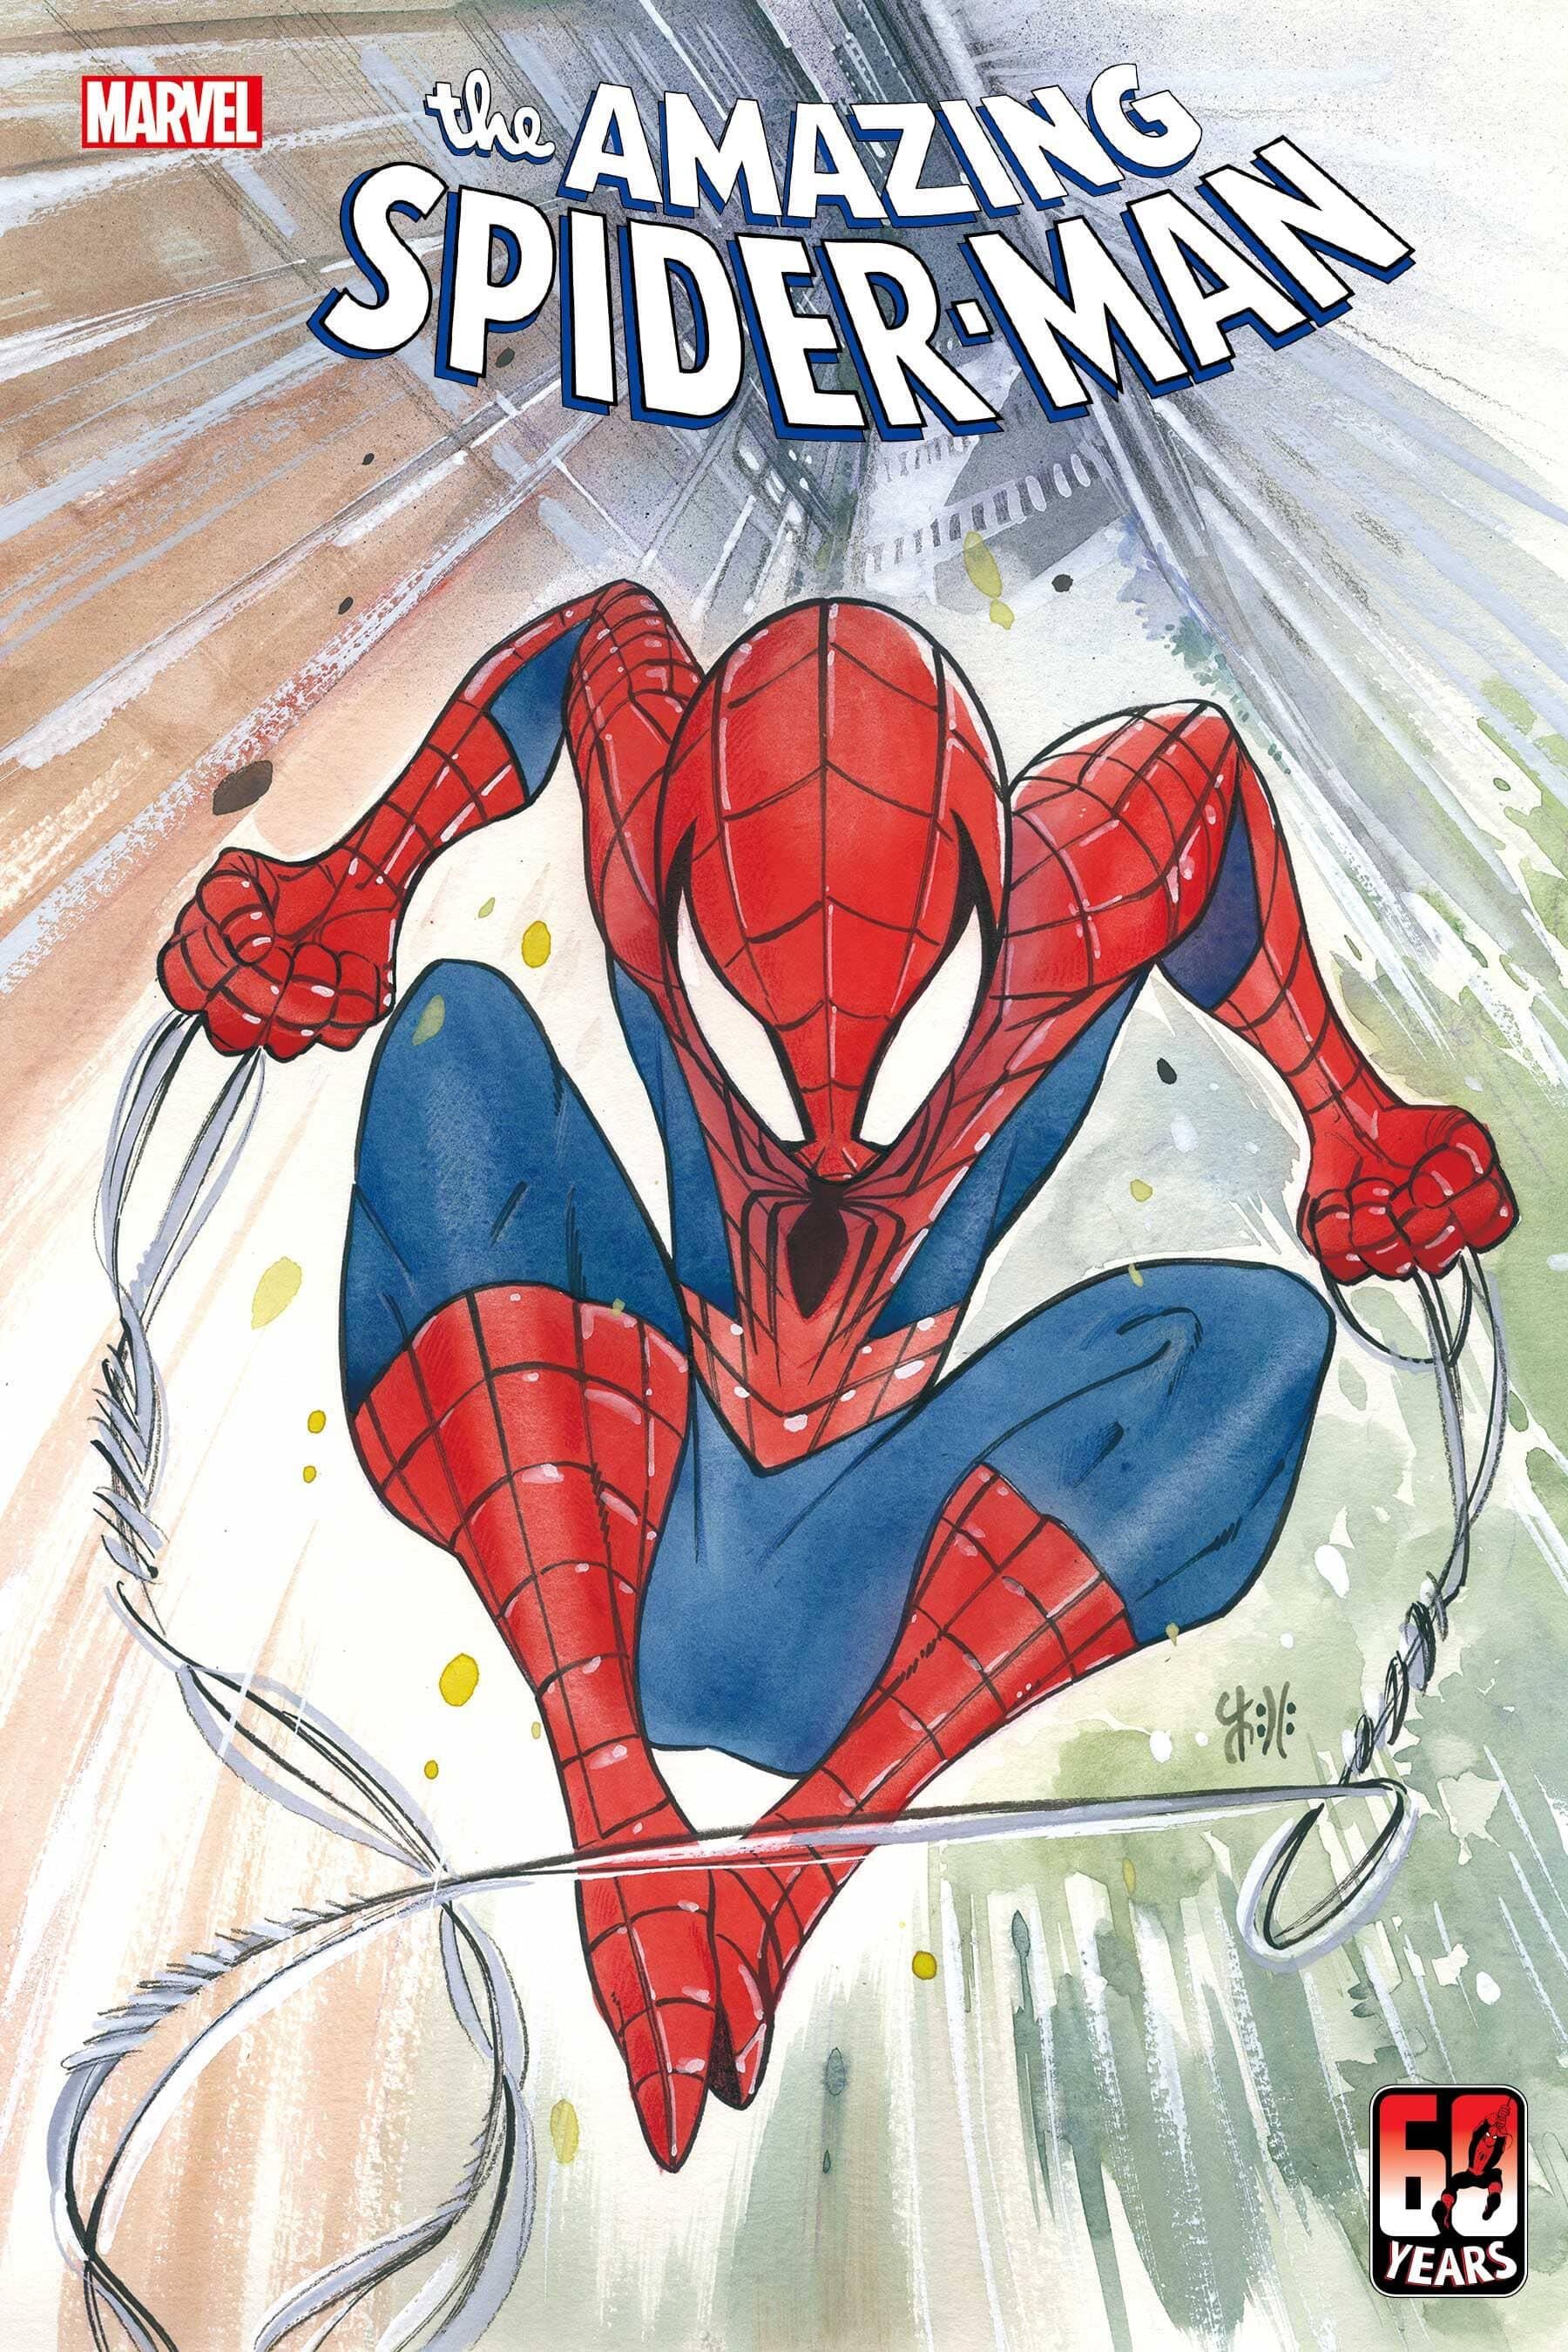 Peter Parker on the cover of Amazing Spider-Man 1 by Peach Momoko